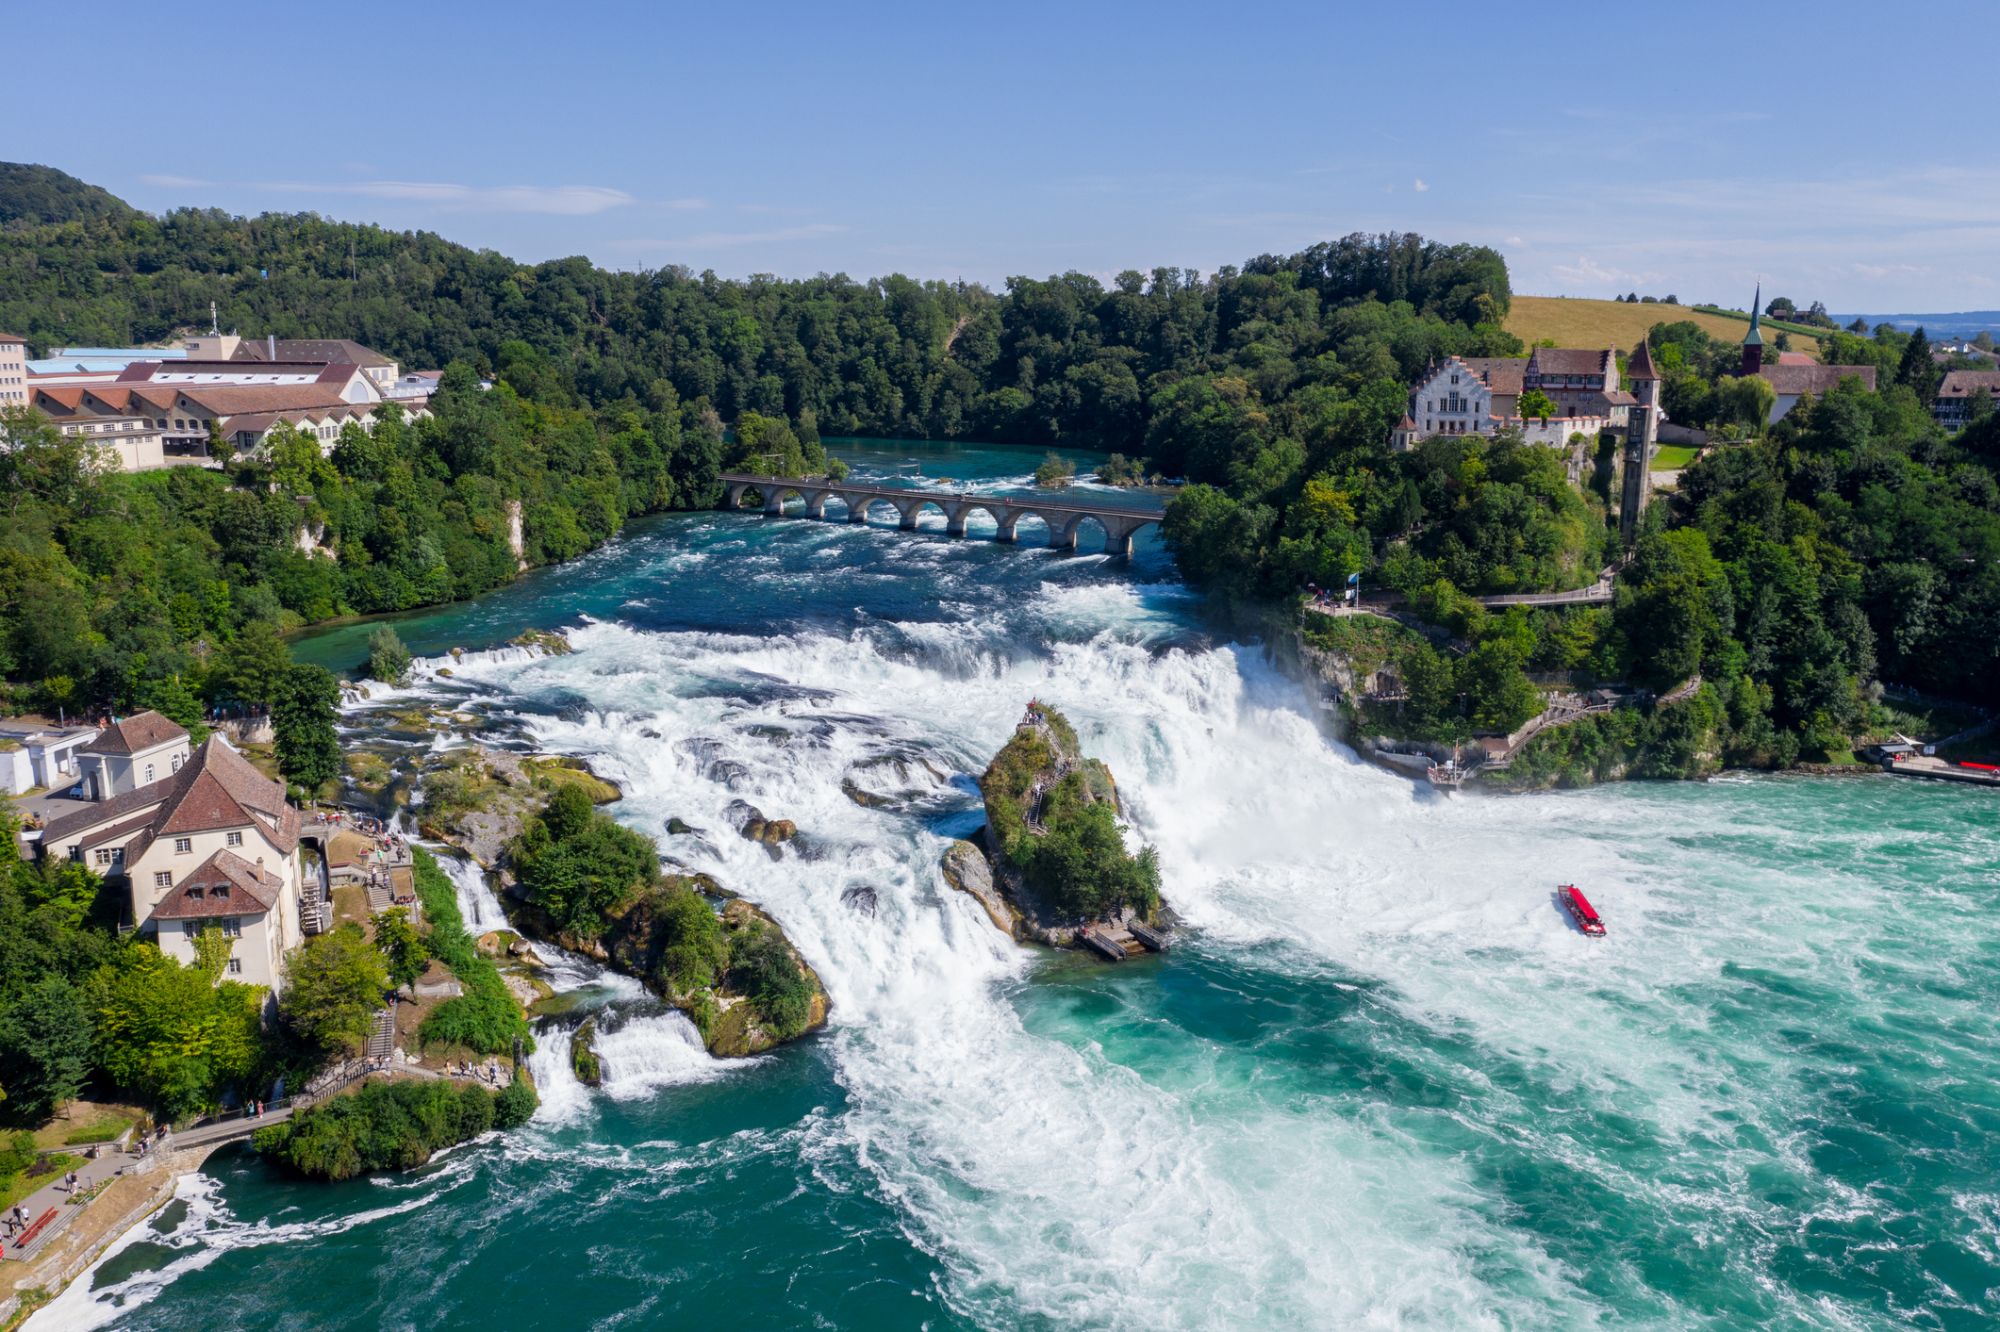 Day 06 - Visit Black Forest – Cuckoo Clock Demonstration – View the Rhine Falls